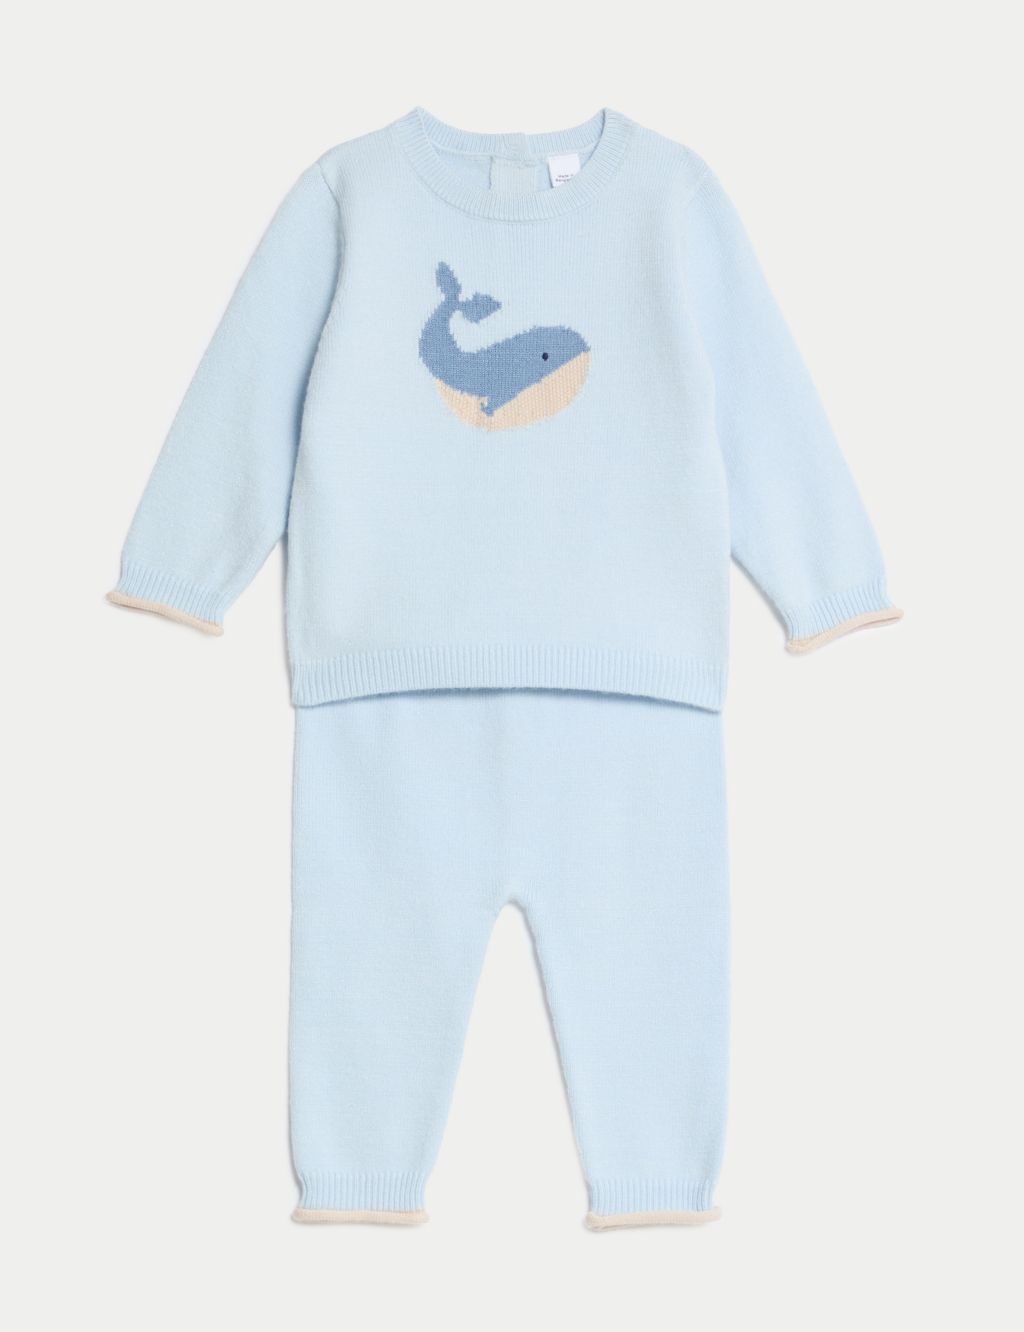 2pc Whale Knitted Outfit (7lbs-1 Yrs)